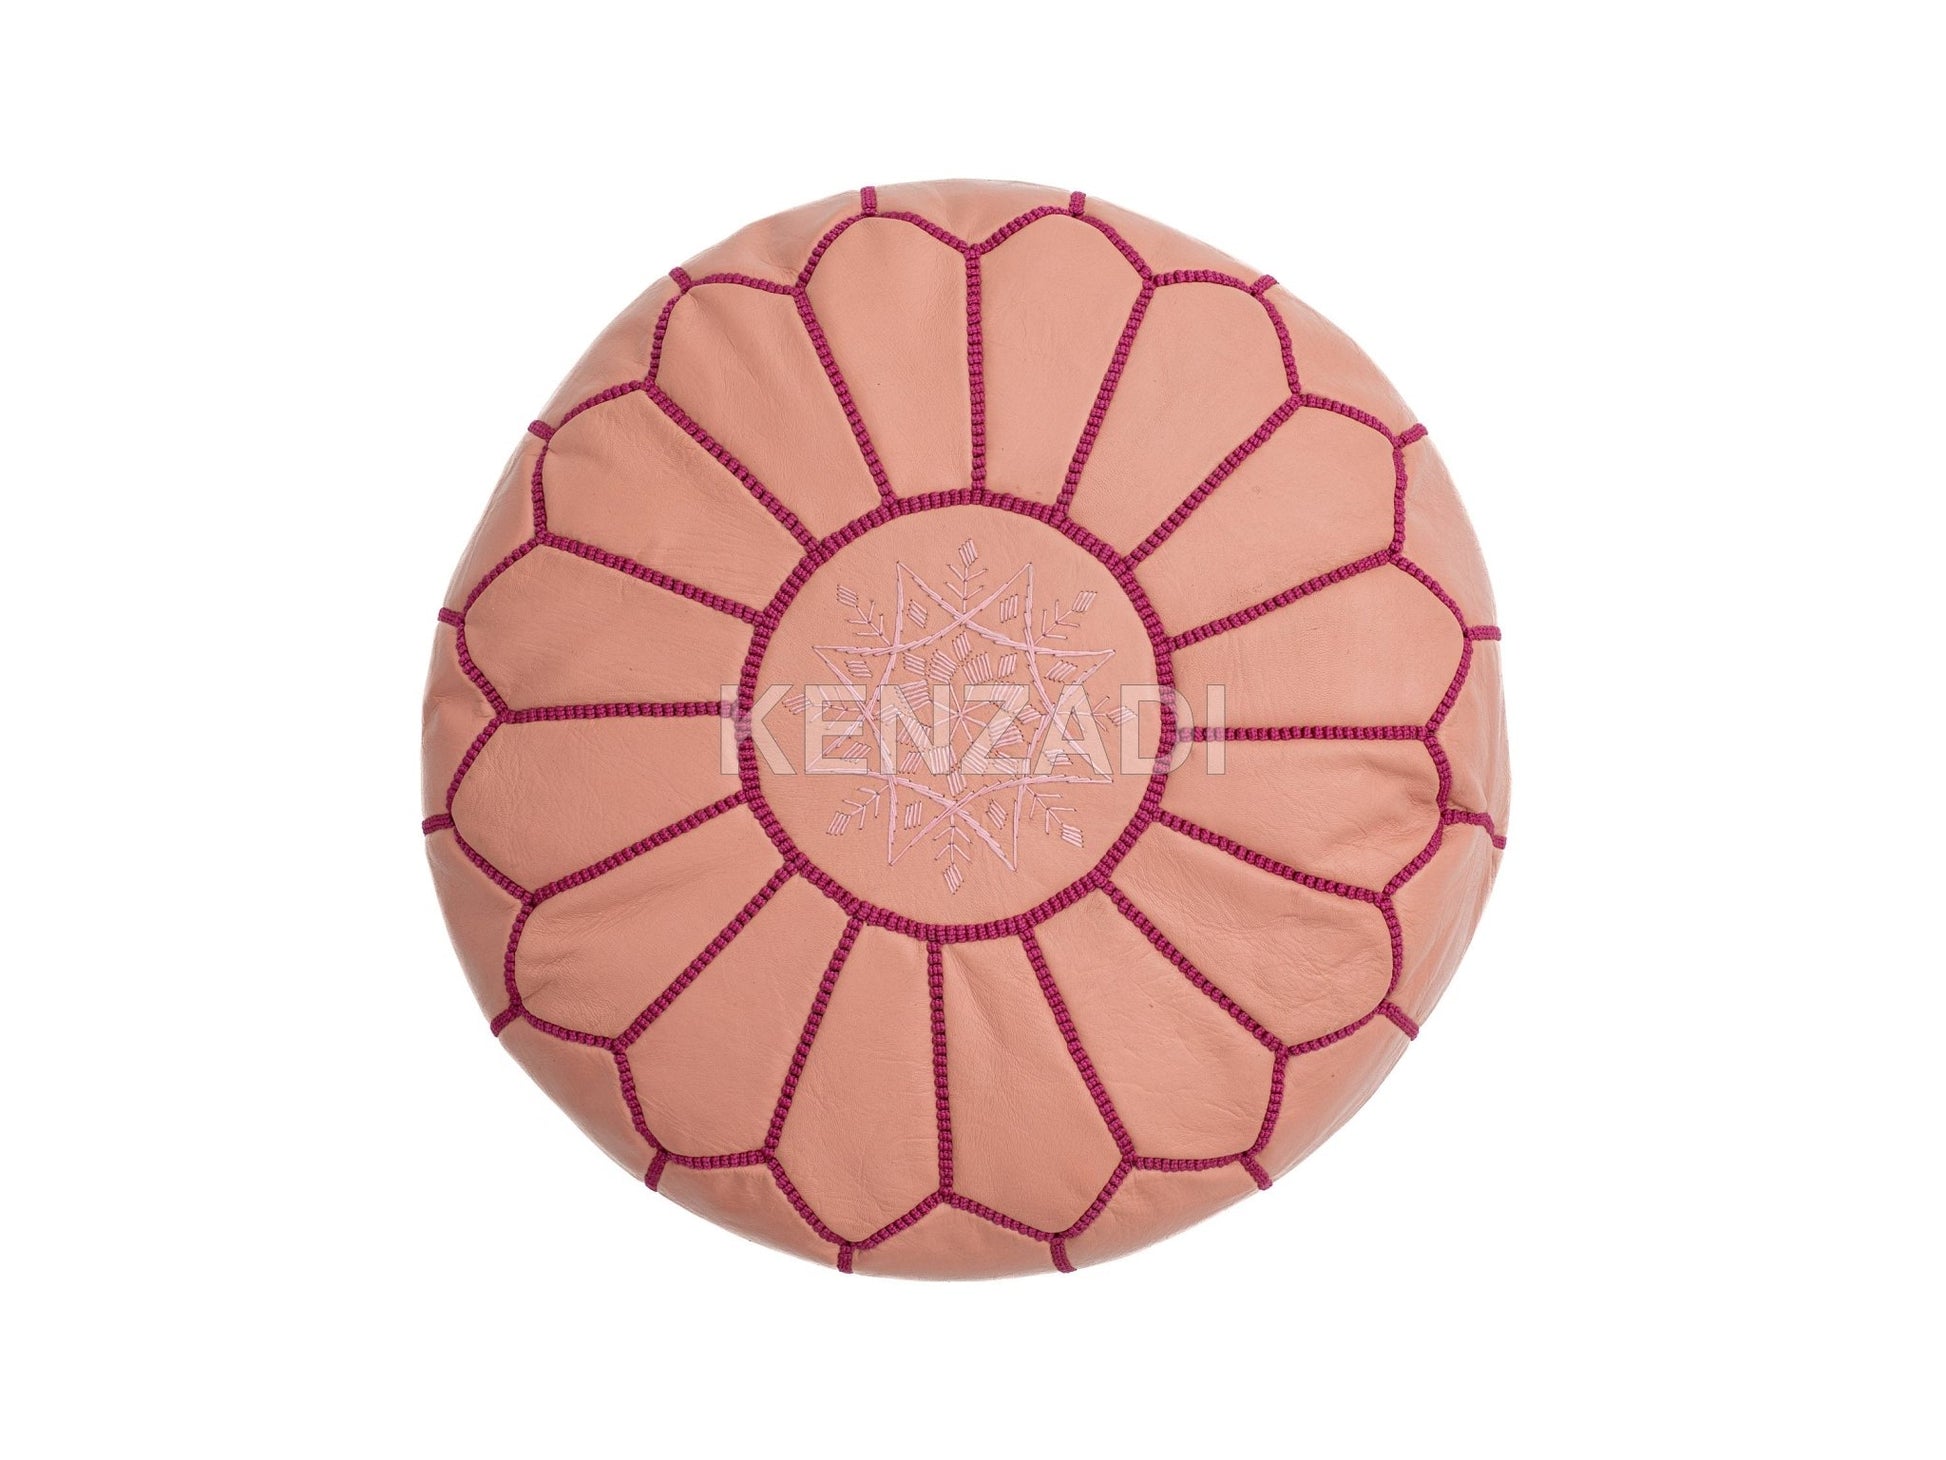 Moroccan leather pouf, round pouf, berber pouf, Light Pink pouf with Pink embroidery by Kenzadi - Handmade by My Poufs